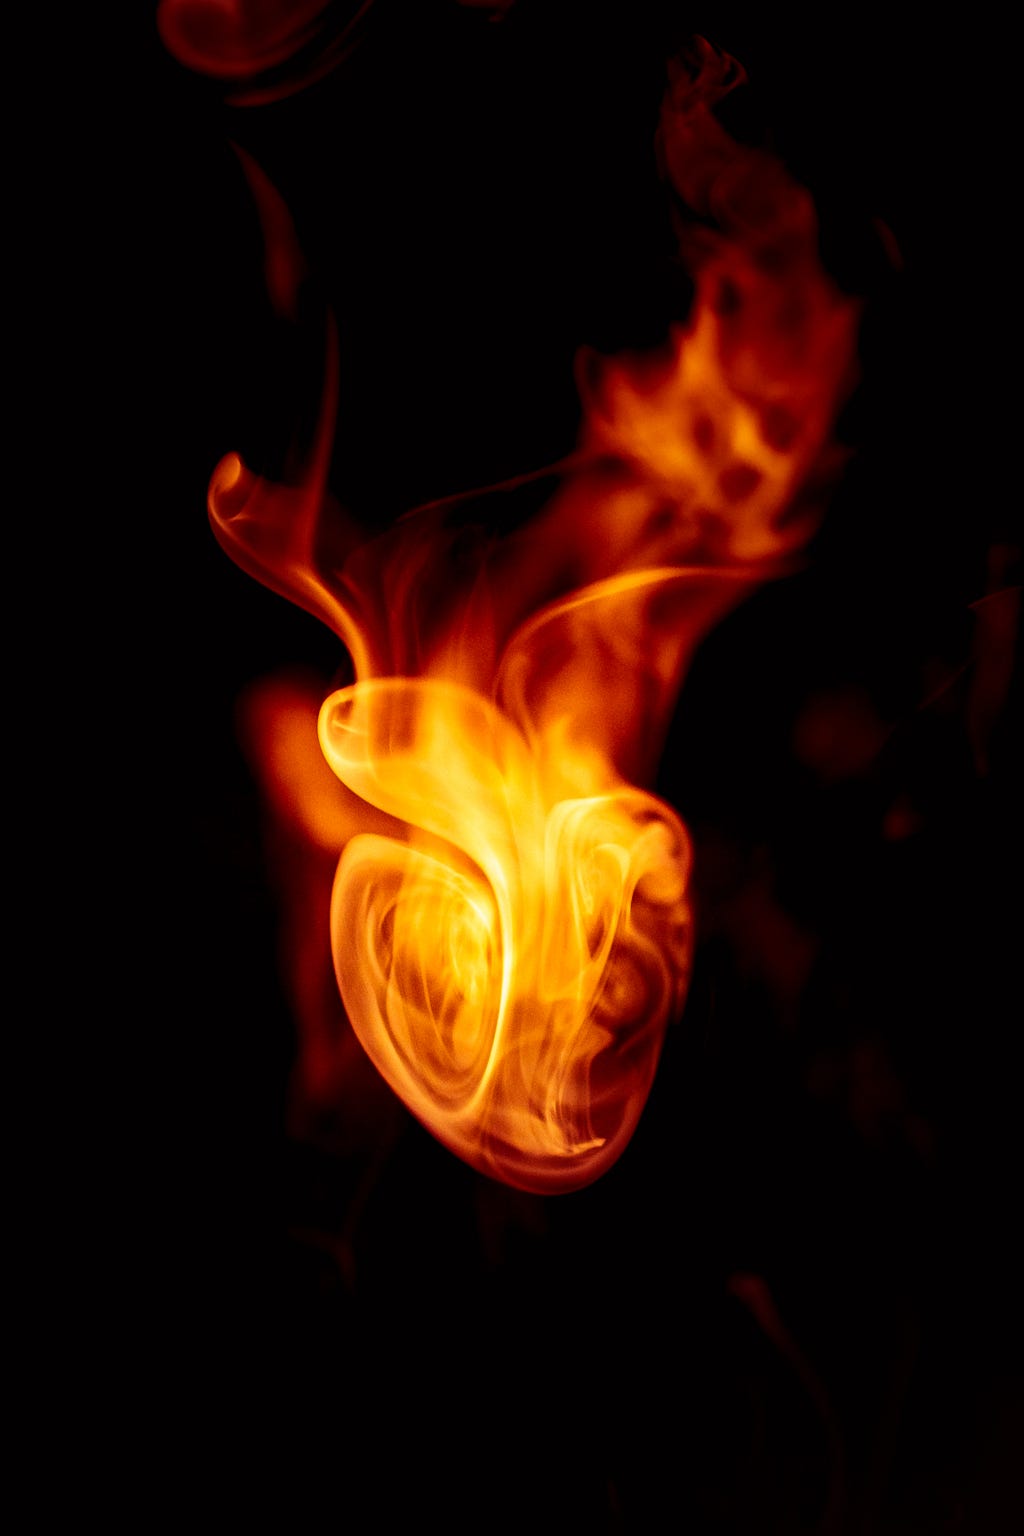 A picture of fire with a shape of a human heart, with a pitch black background